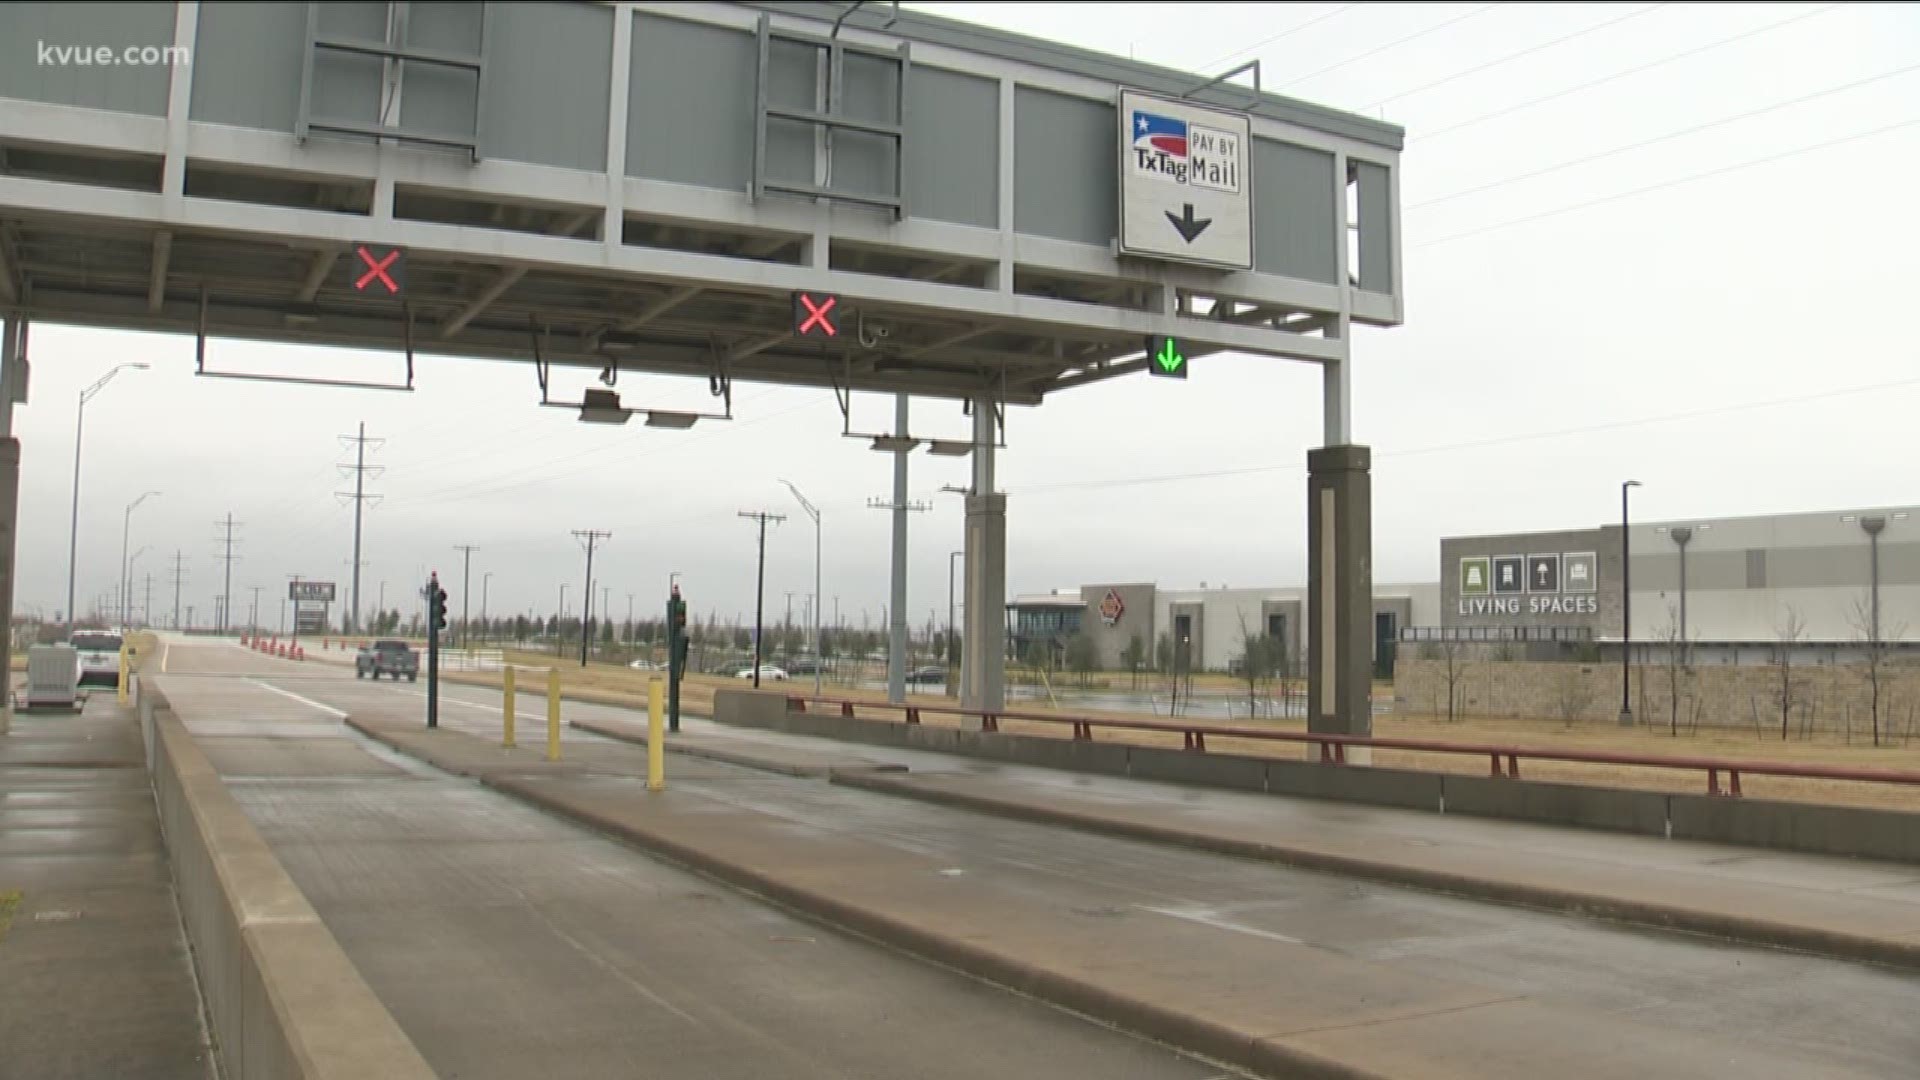 You may have to pay more to drive in Austin. Toll road prices are expected to go up at the start of the year.